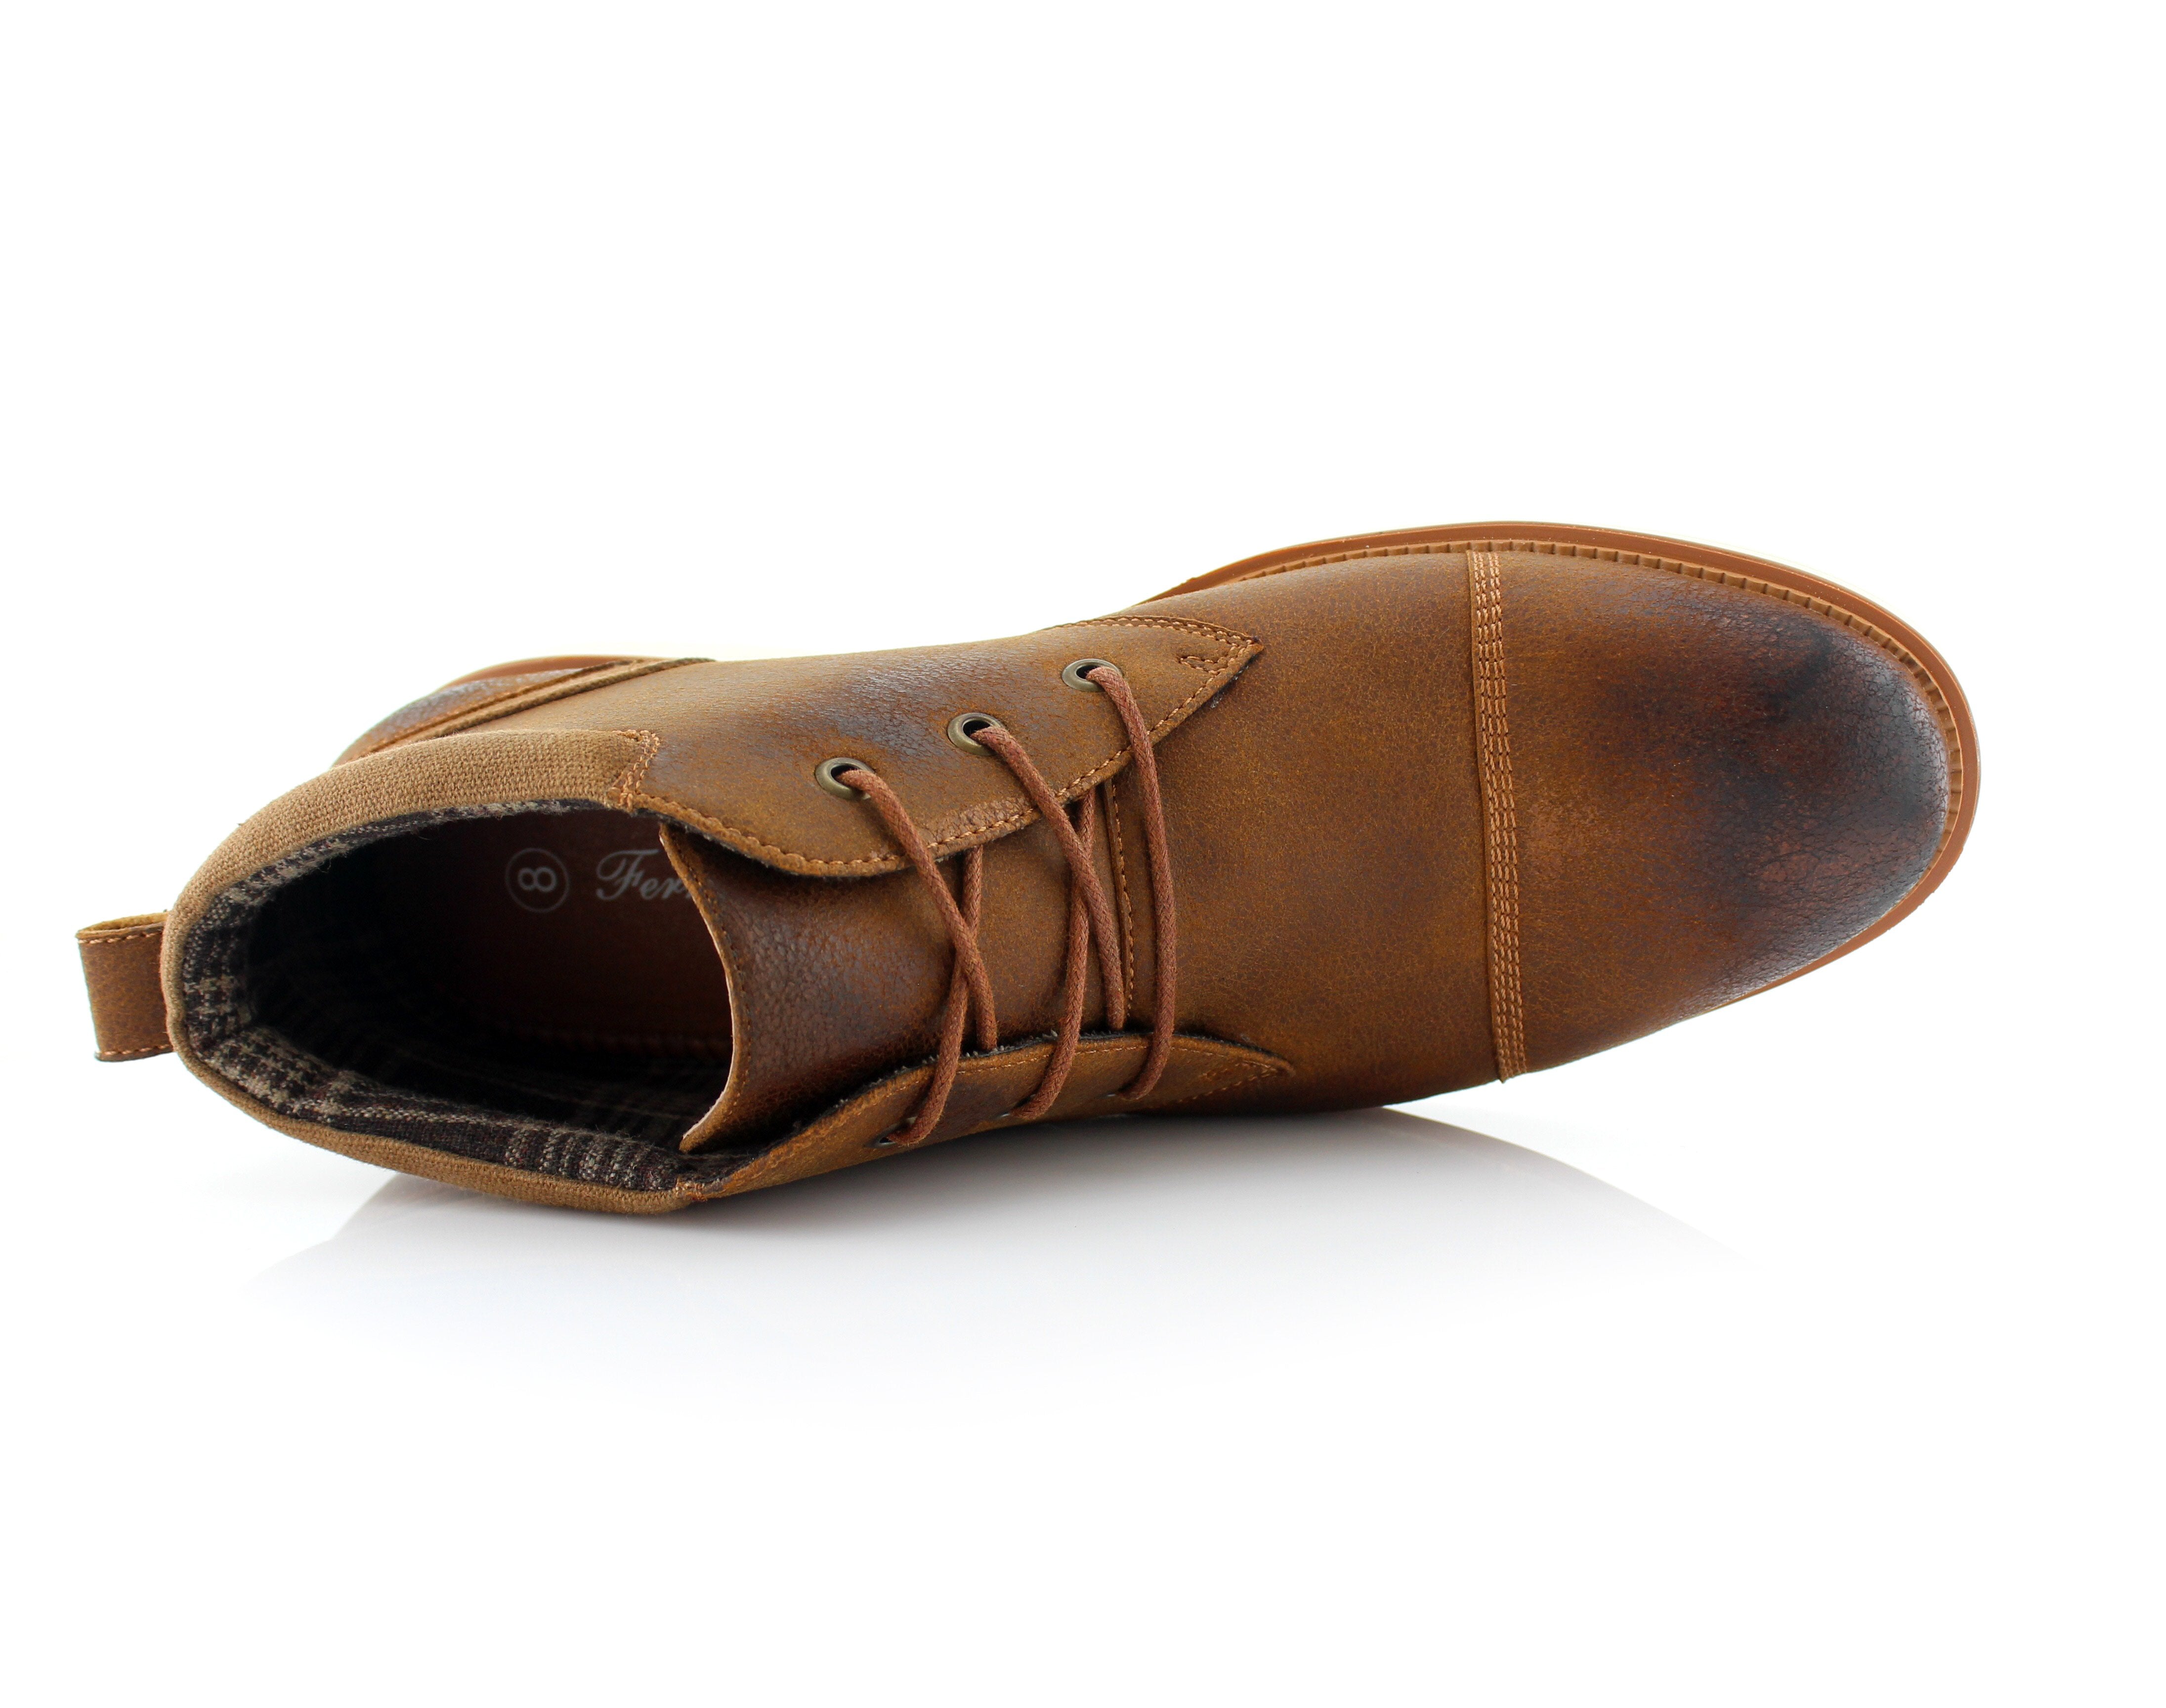 Burnished Cap-Toe Chukka Boots | Sammy by Ferro Aldo | Conal Footwear | Top-Down Angle View